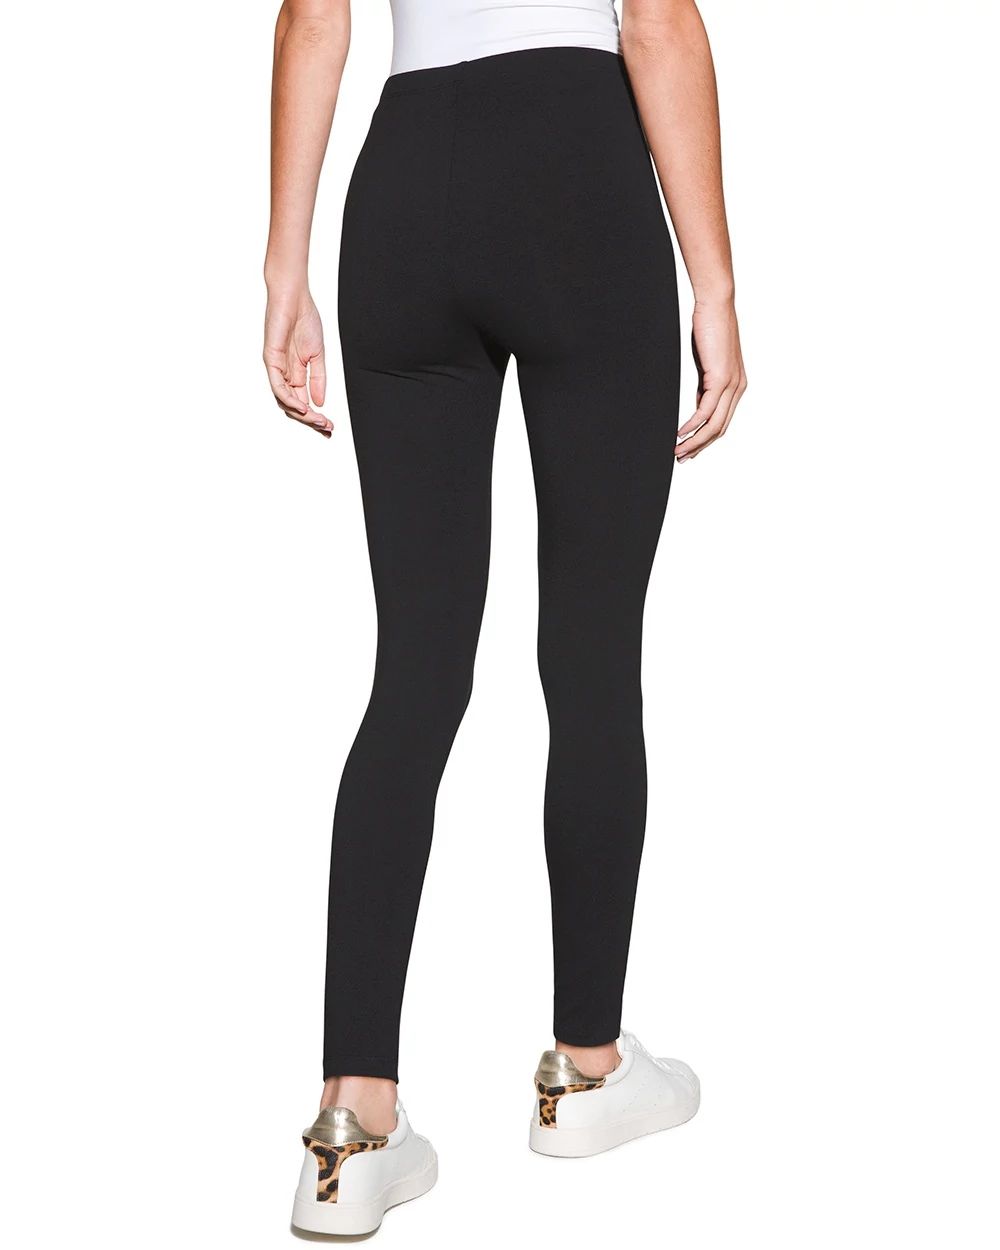 Outlet WHBM Essential Leggings click to view larger image.